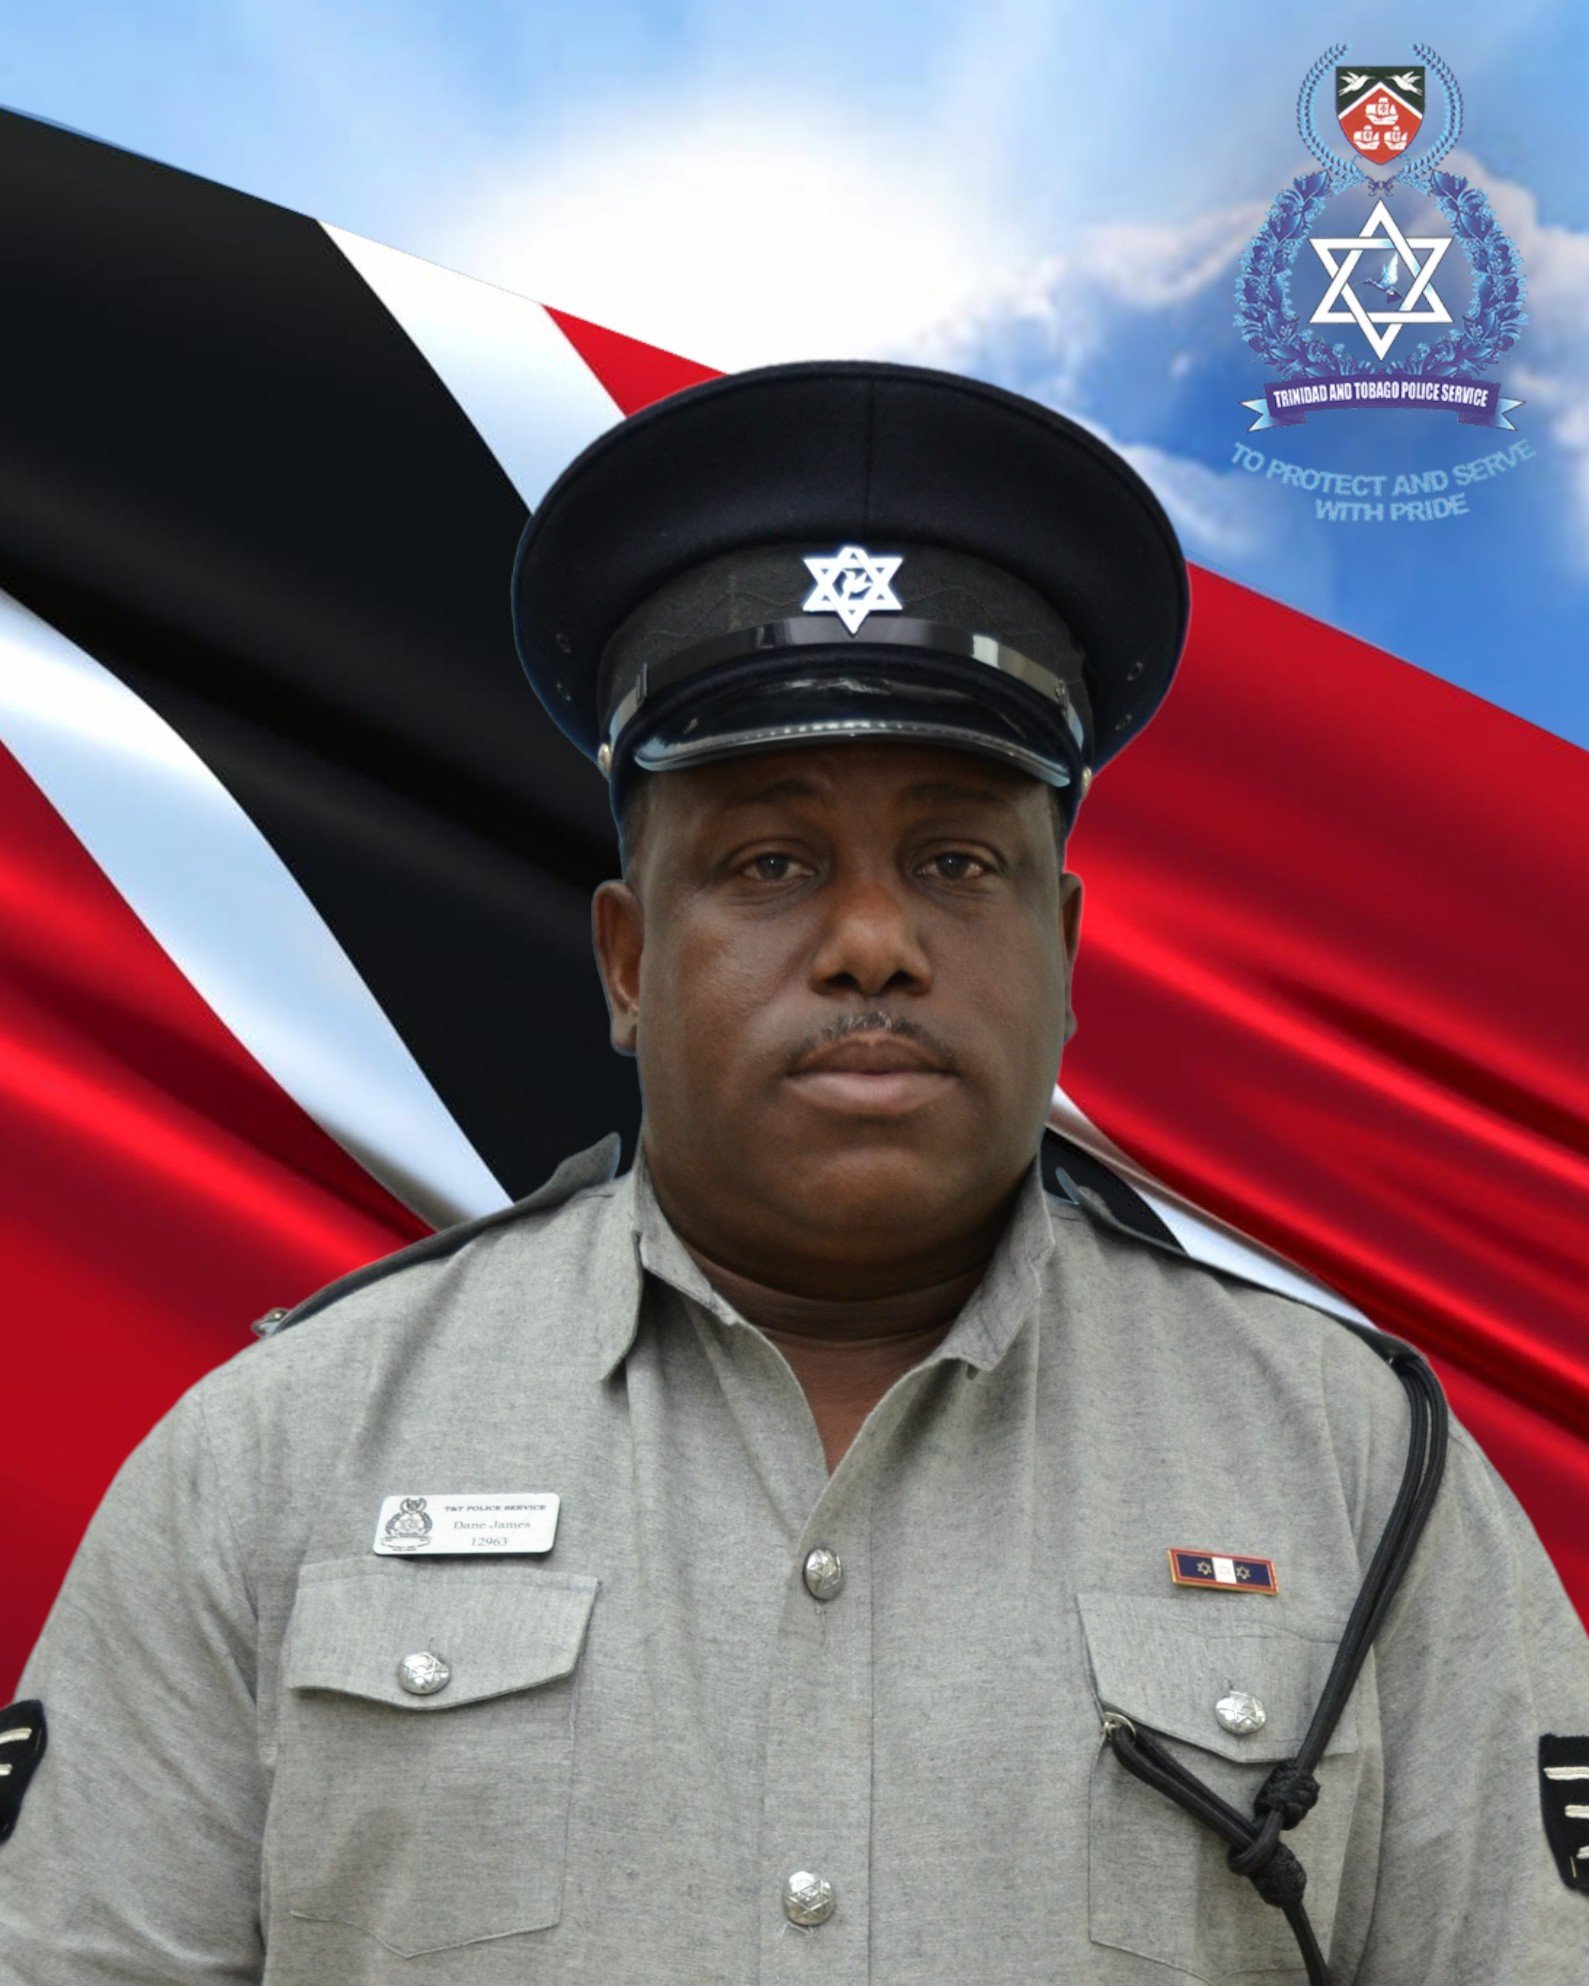 TTPS extends condolences to colleague who passed away